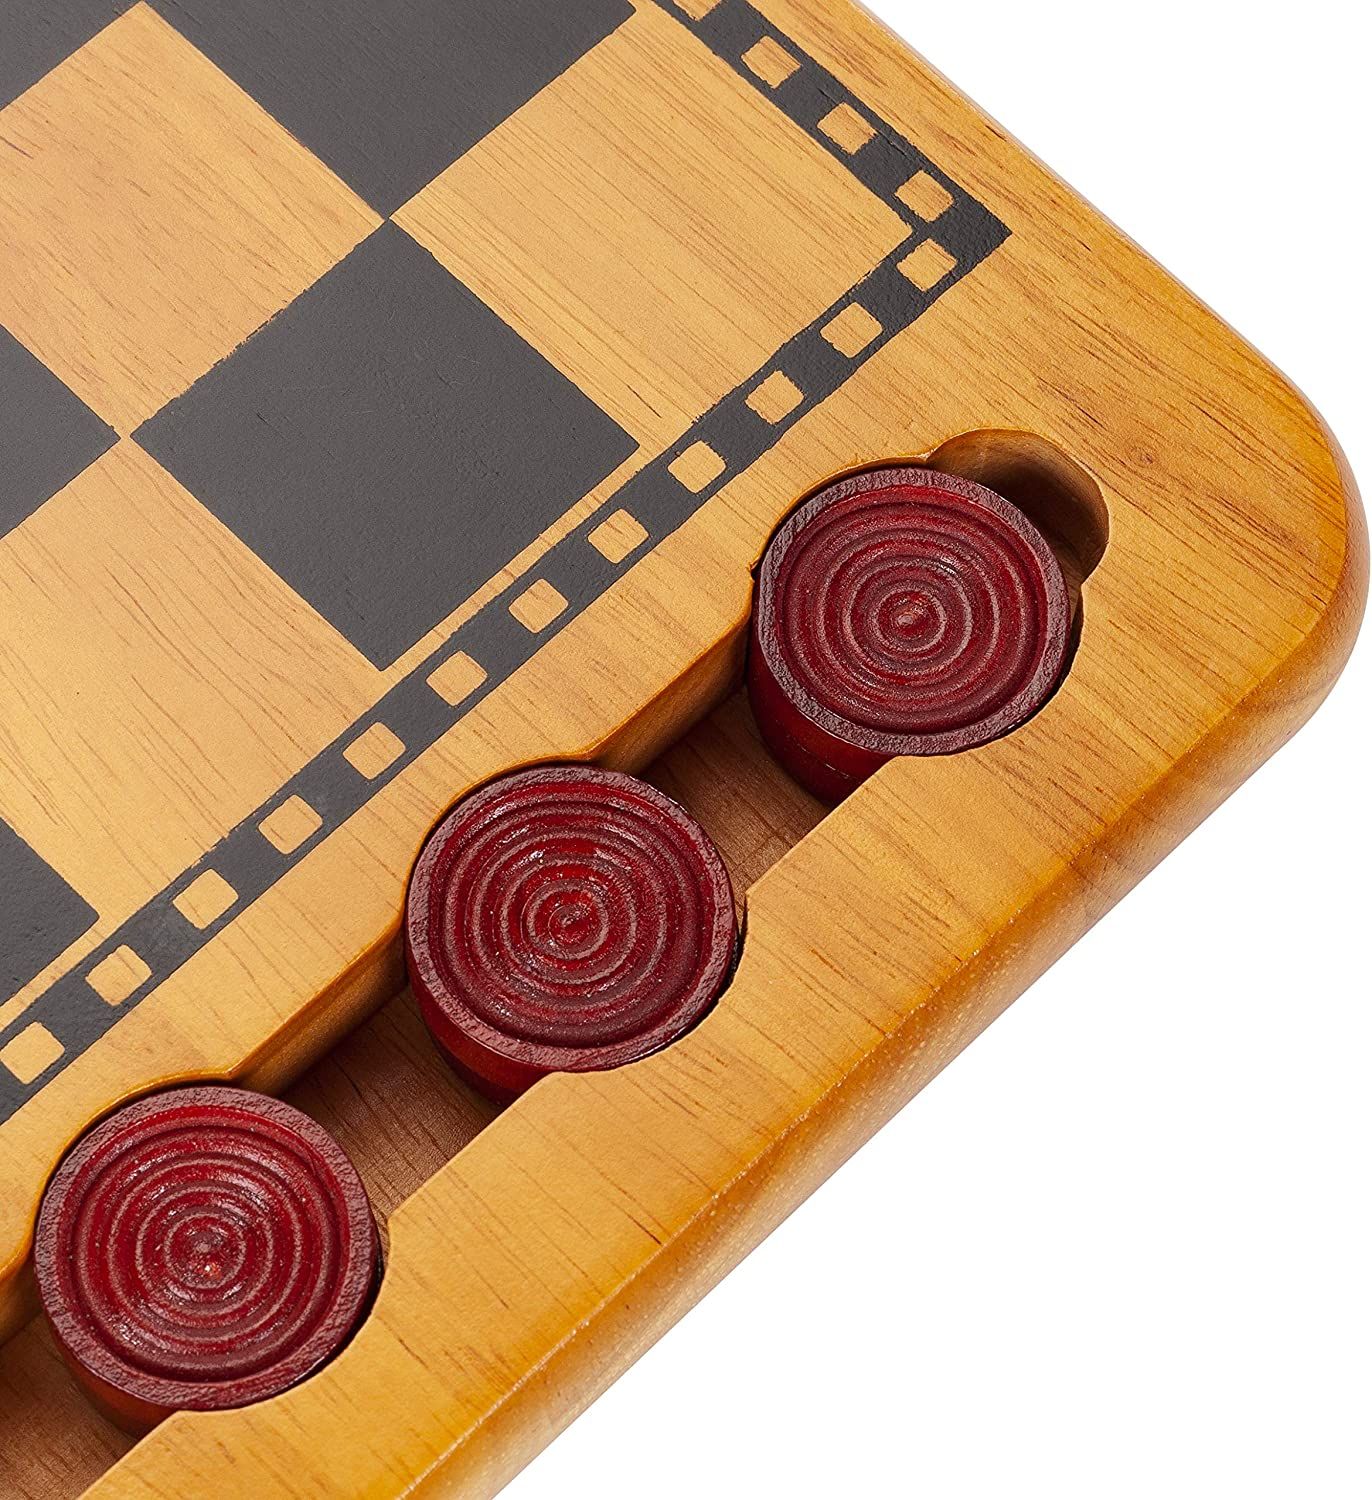 We classic wooden checkers game is one of the most beautiful board games